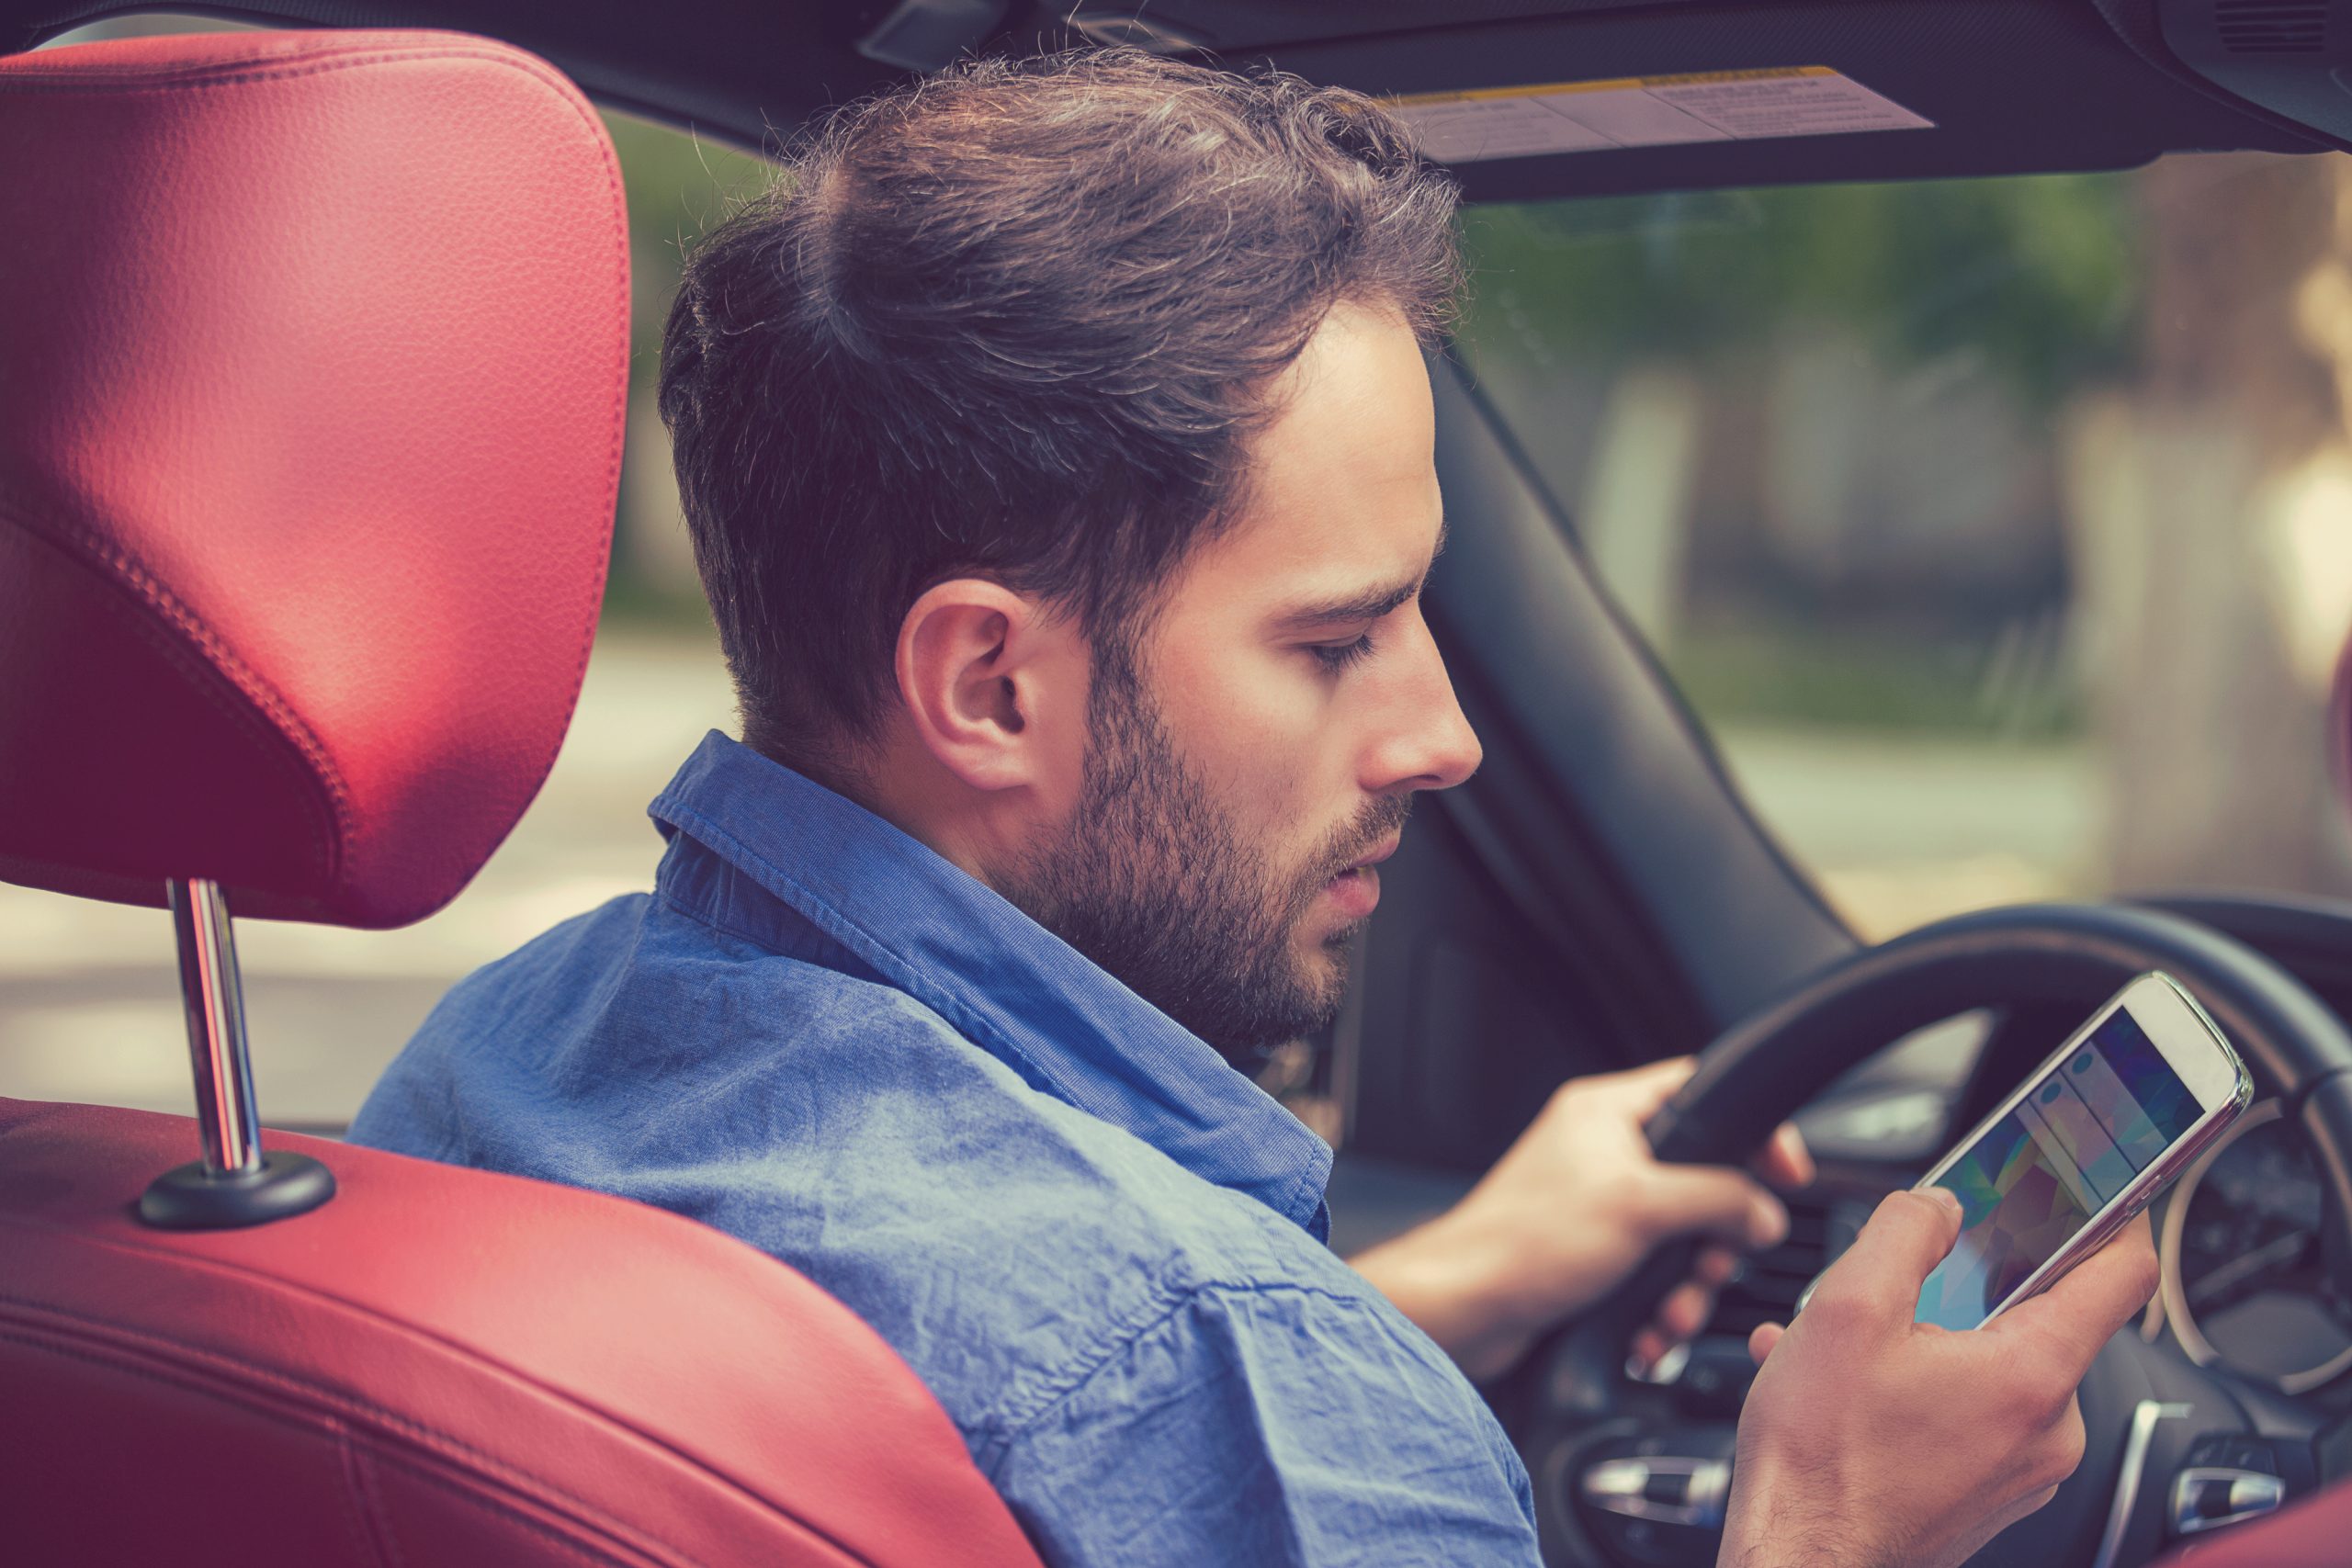 51% of new england drivers admit to cell phone use when alone in car